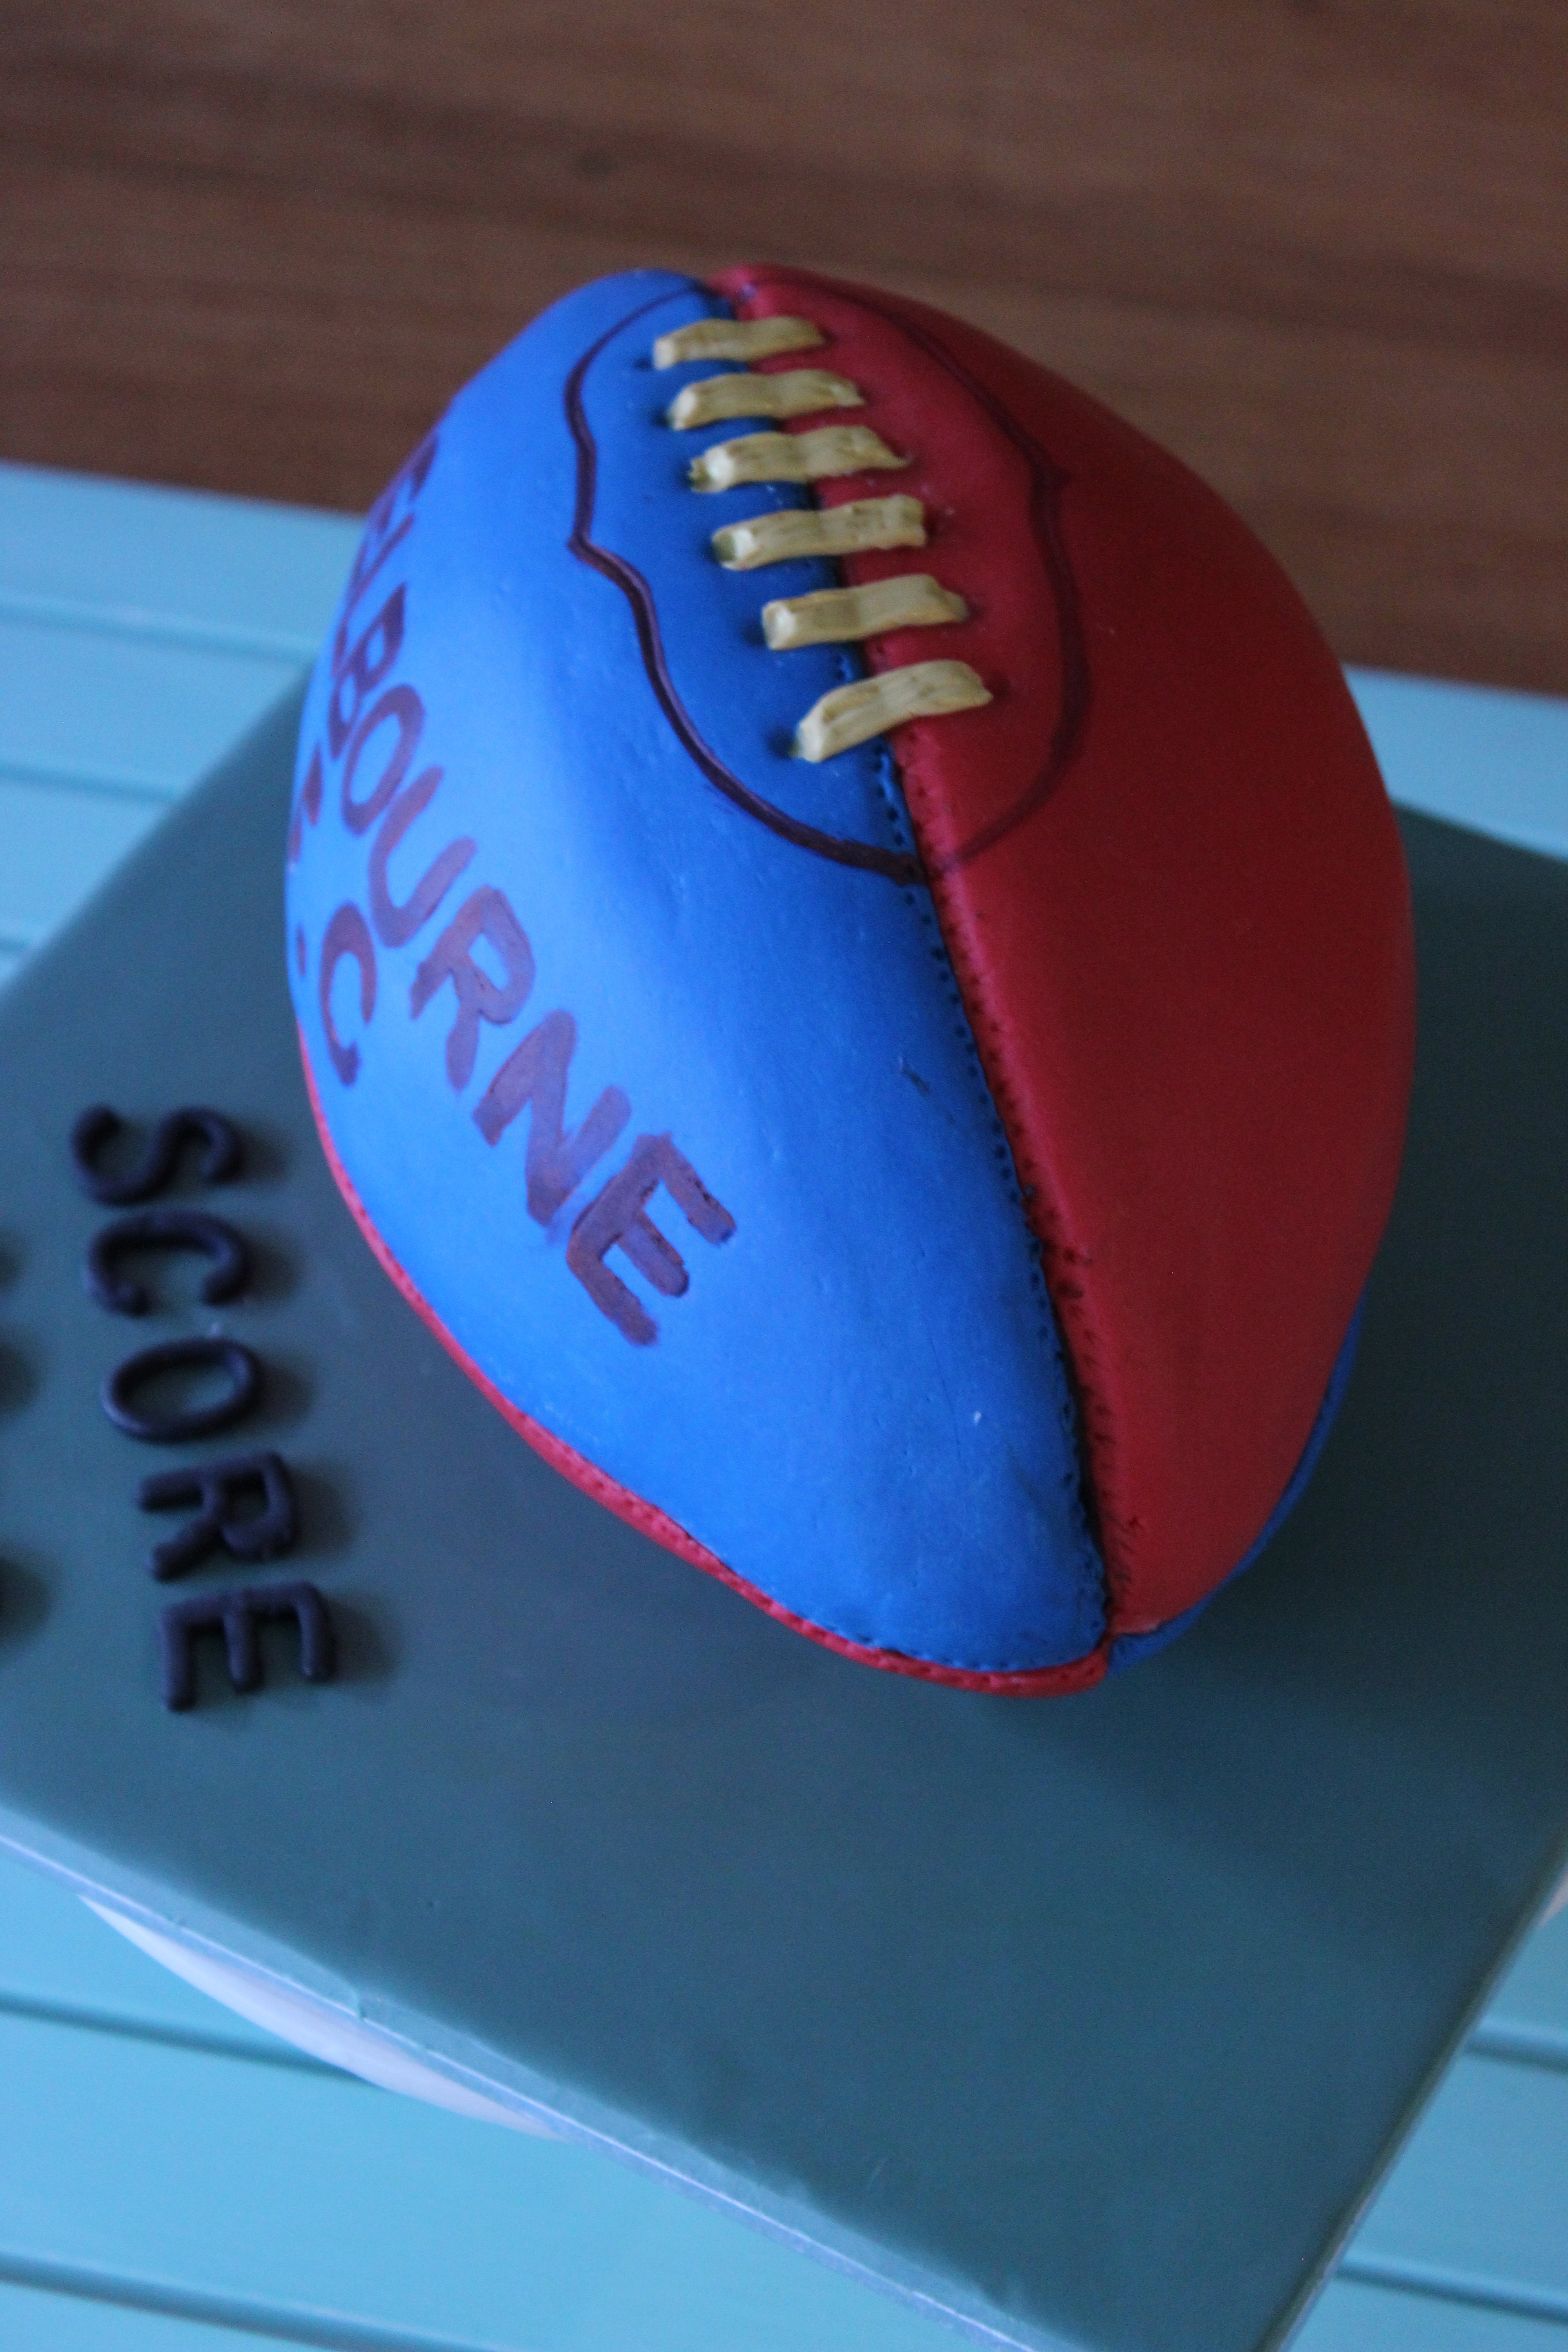 Theme in a Box — Cake Decoration Kits - AFL